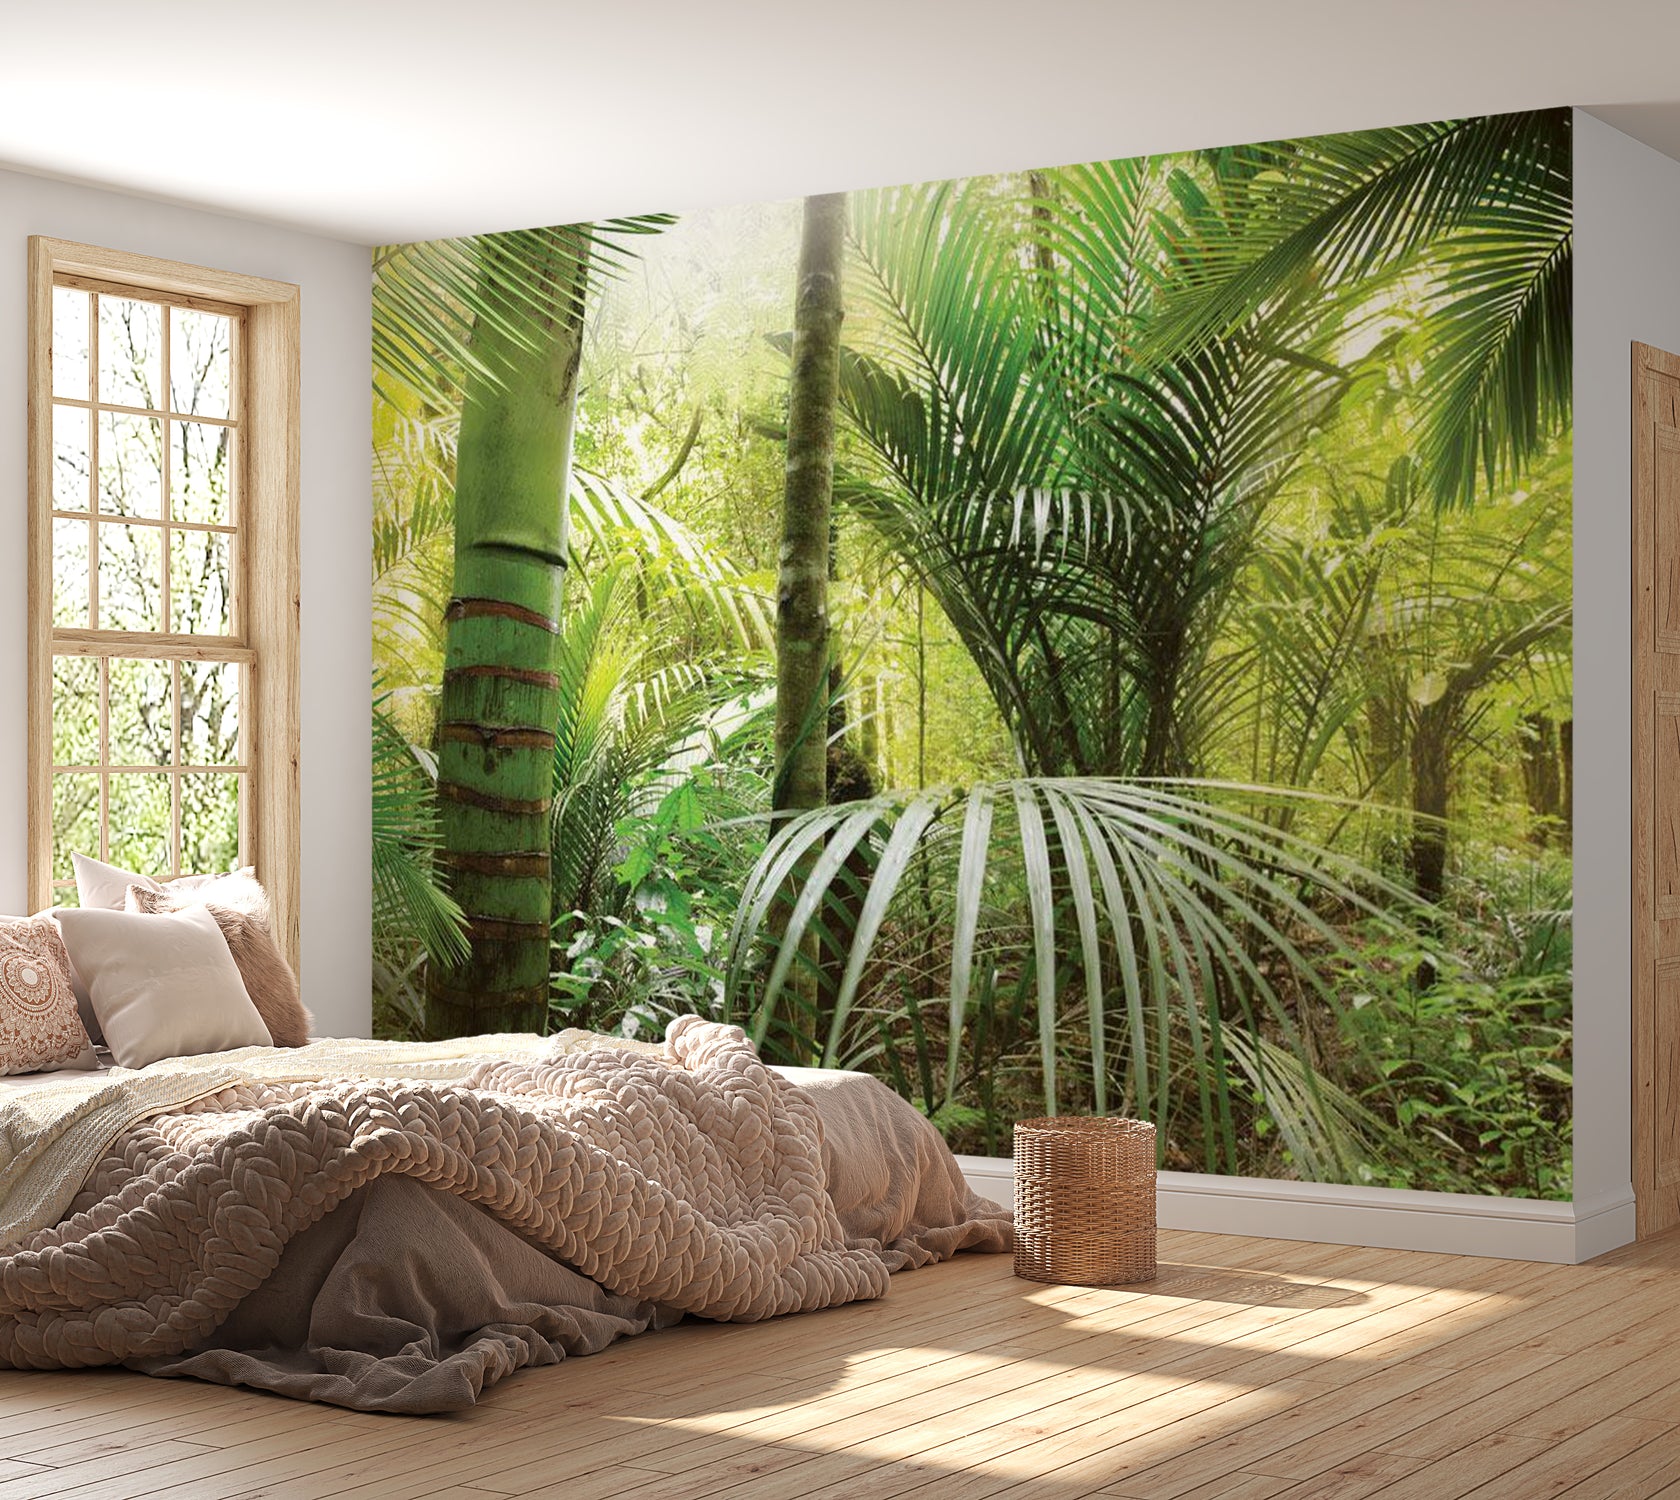 Peel & Stick Forest Wall Mural - Green Alley - Removable Wall Decals